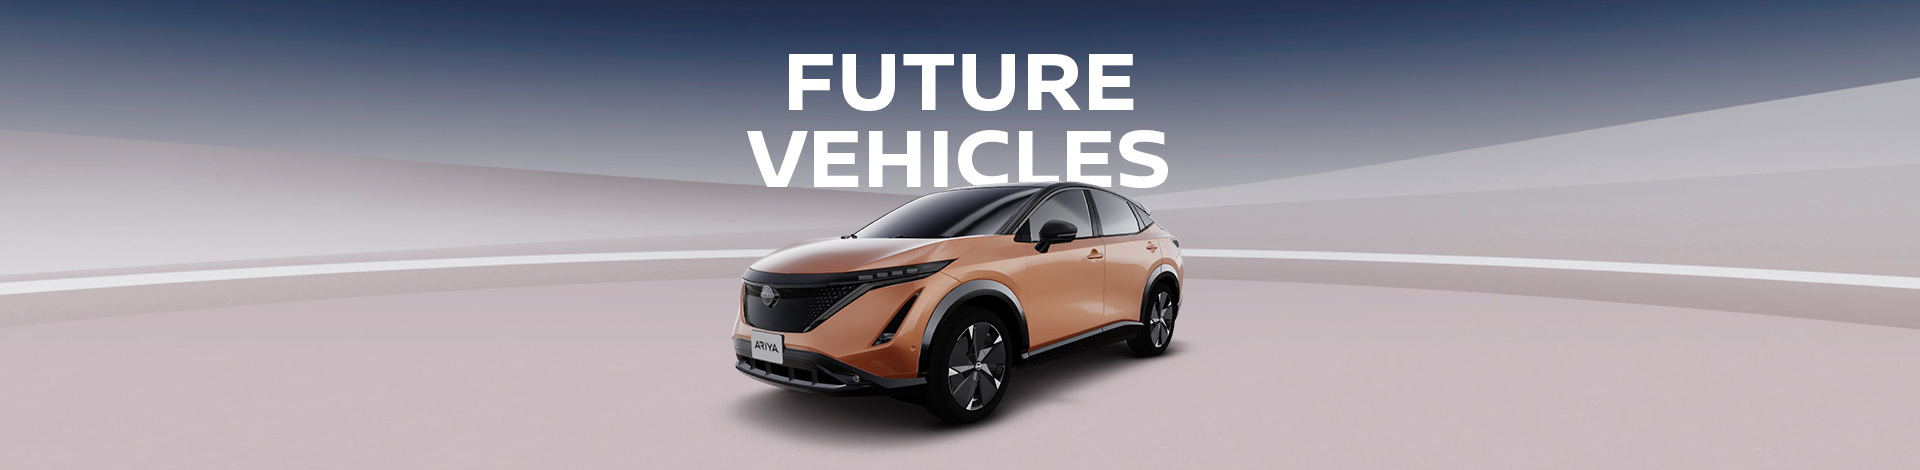 Nissan Future Vehicles Page